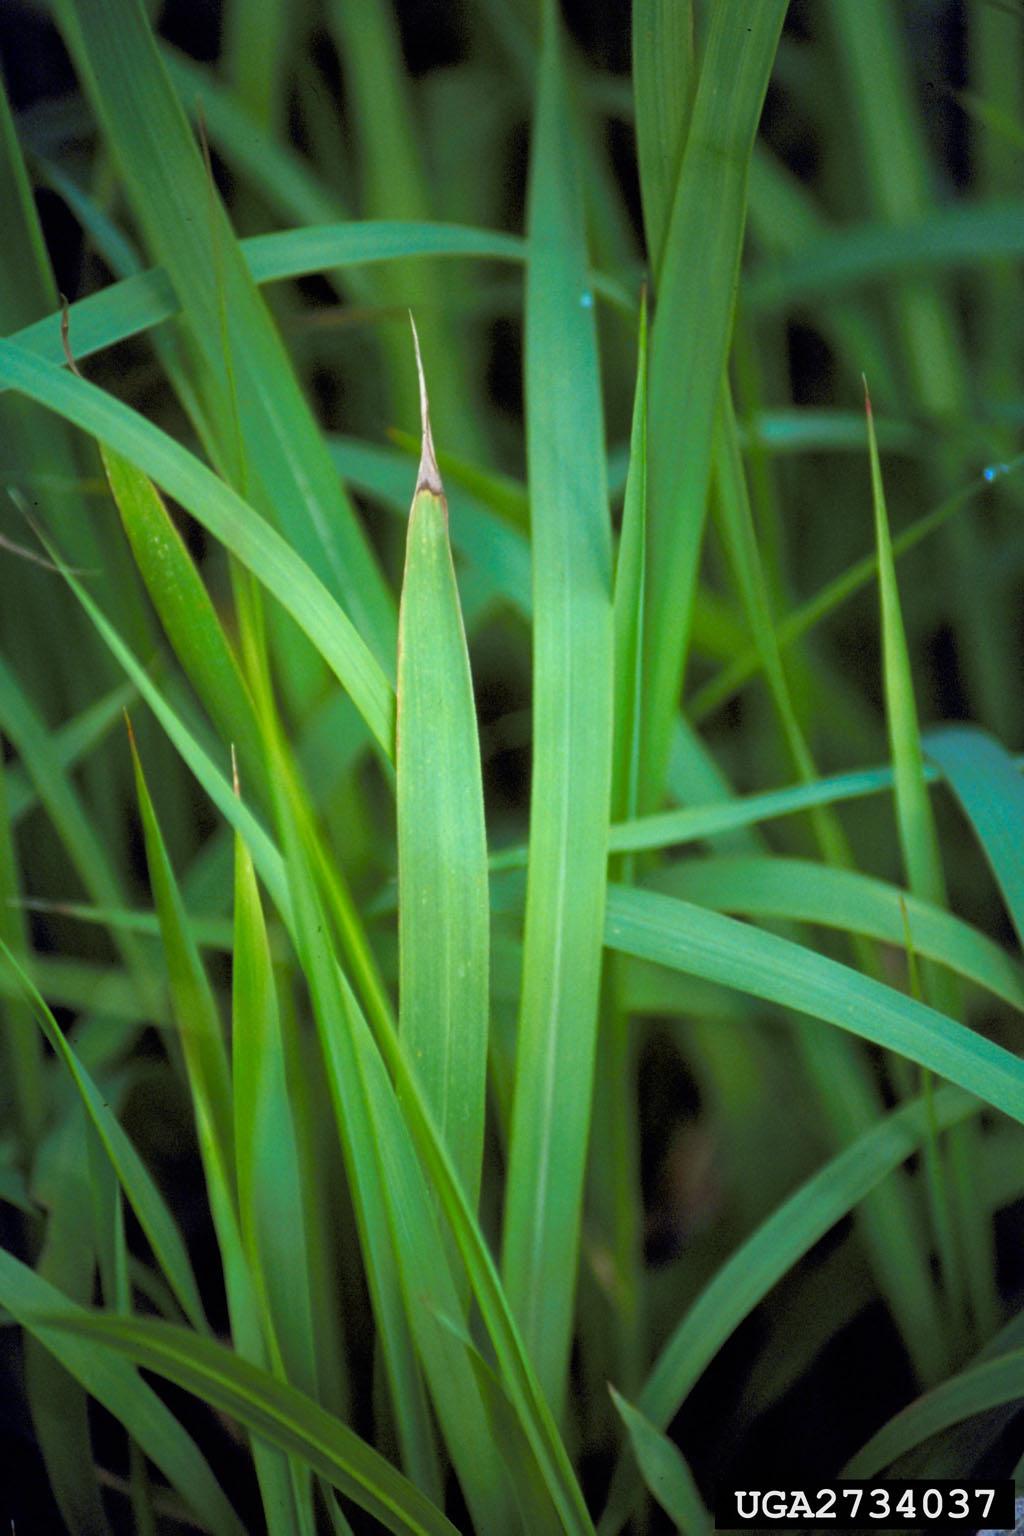 Figure 2. Cogongrass leaves have serrated edges and a prominent, white, off-center midrib. Credits: L. M. Marsh, Florida Department of Agriculture and Consumer Services, www.forestryimages.org.